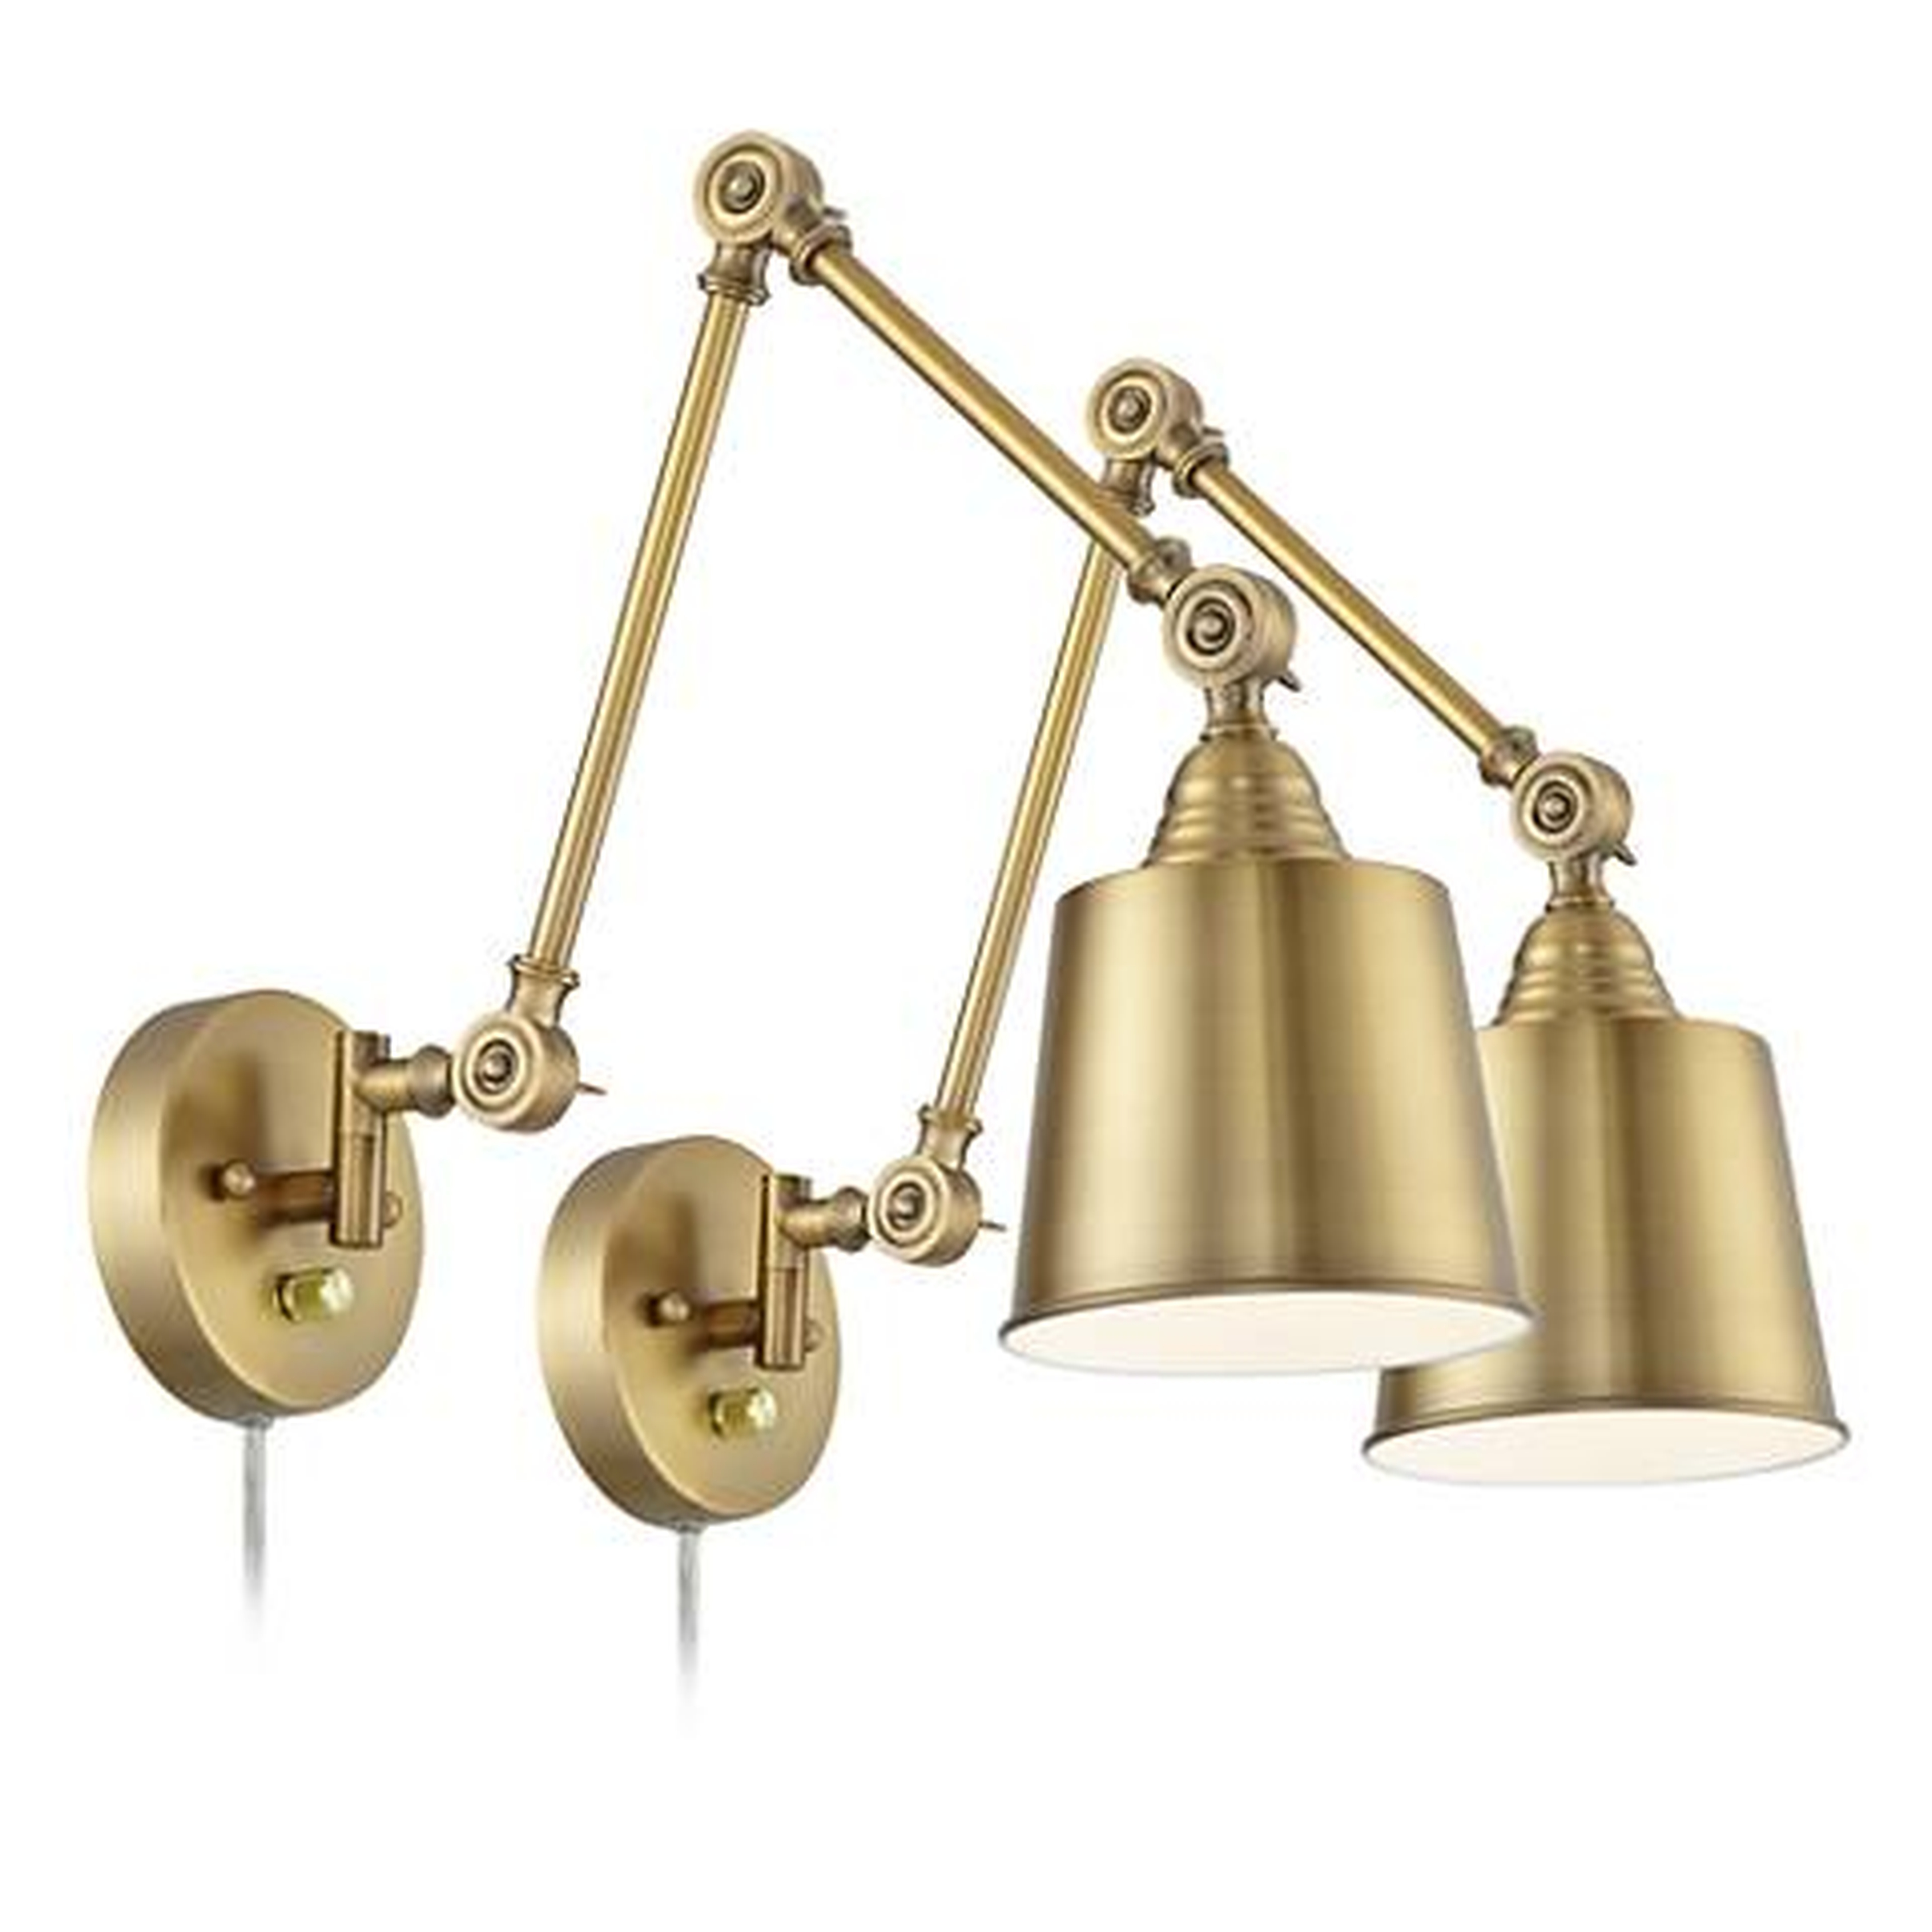 360 Lighting Mendes Antique Brass Swing Arm Plug-In Wall Lamps Set of 2 - Lamps Plus